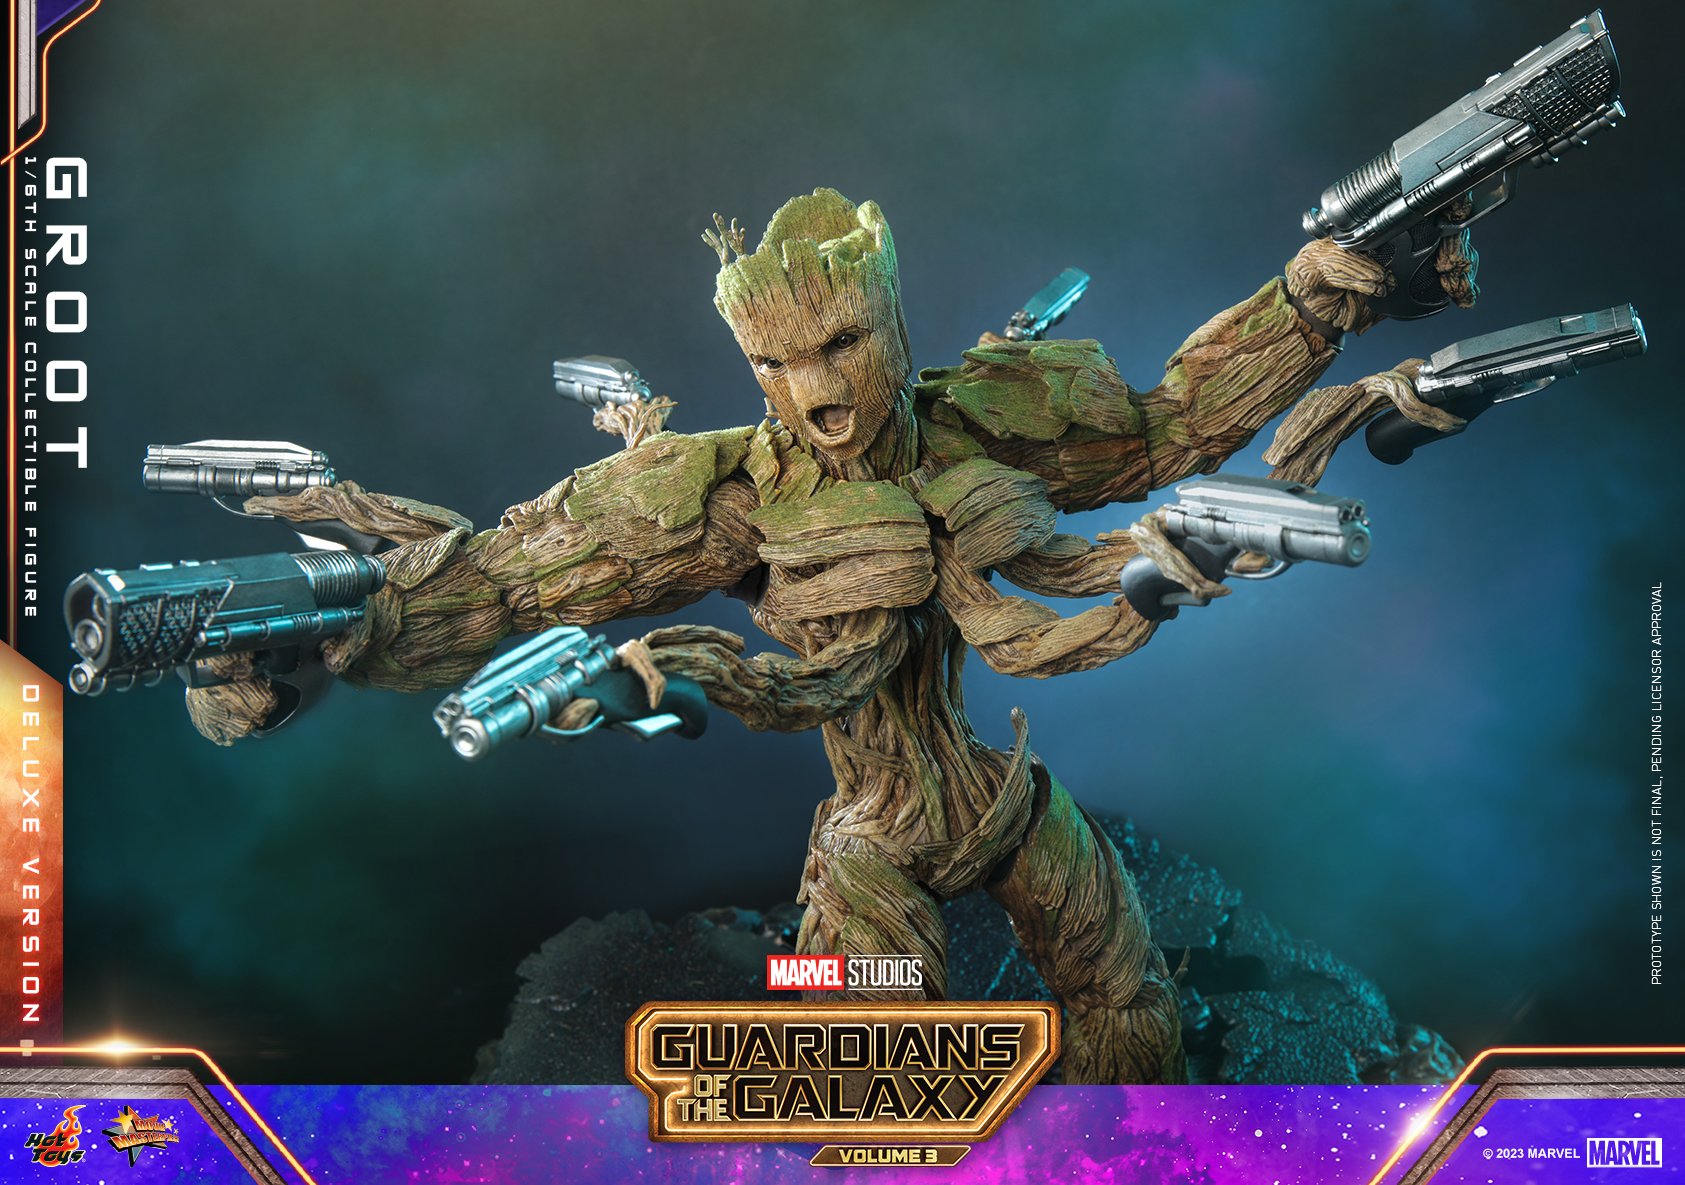 Hot-Toys-GotG3-Groot-Deluxe-013.jpeg